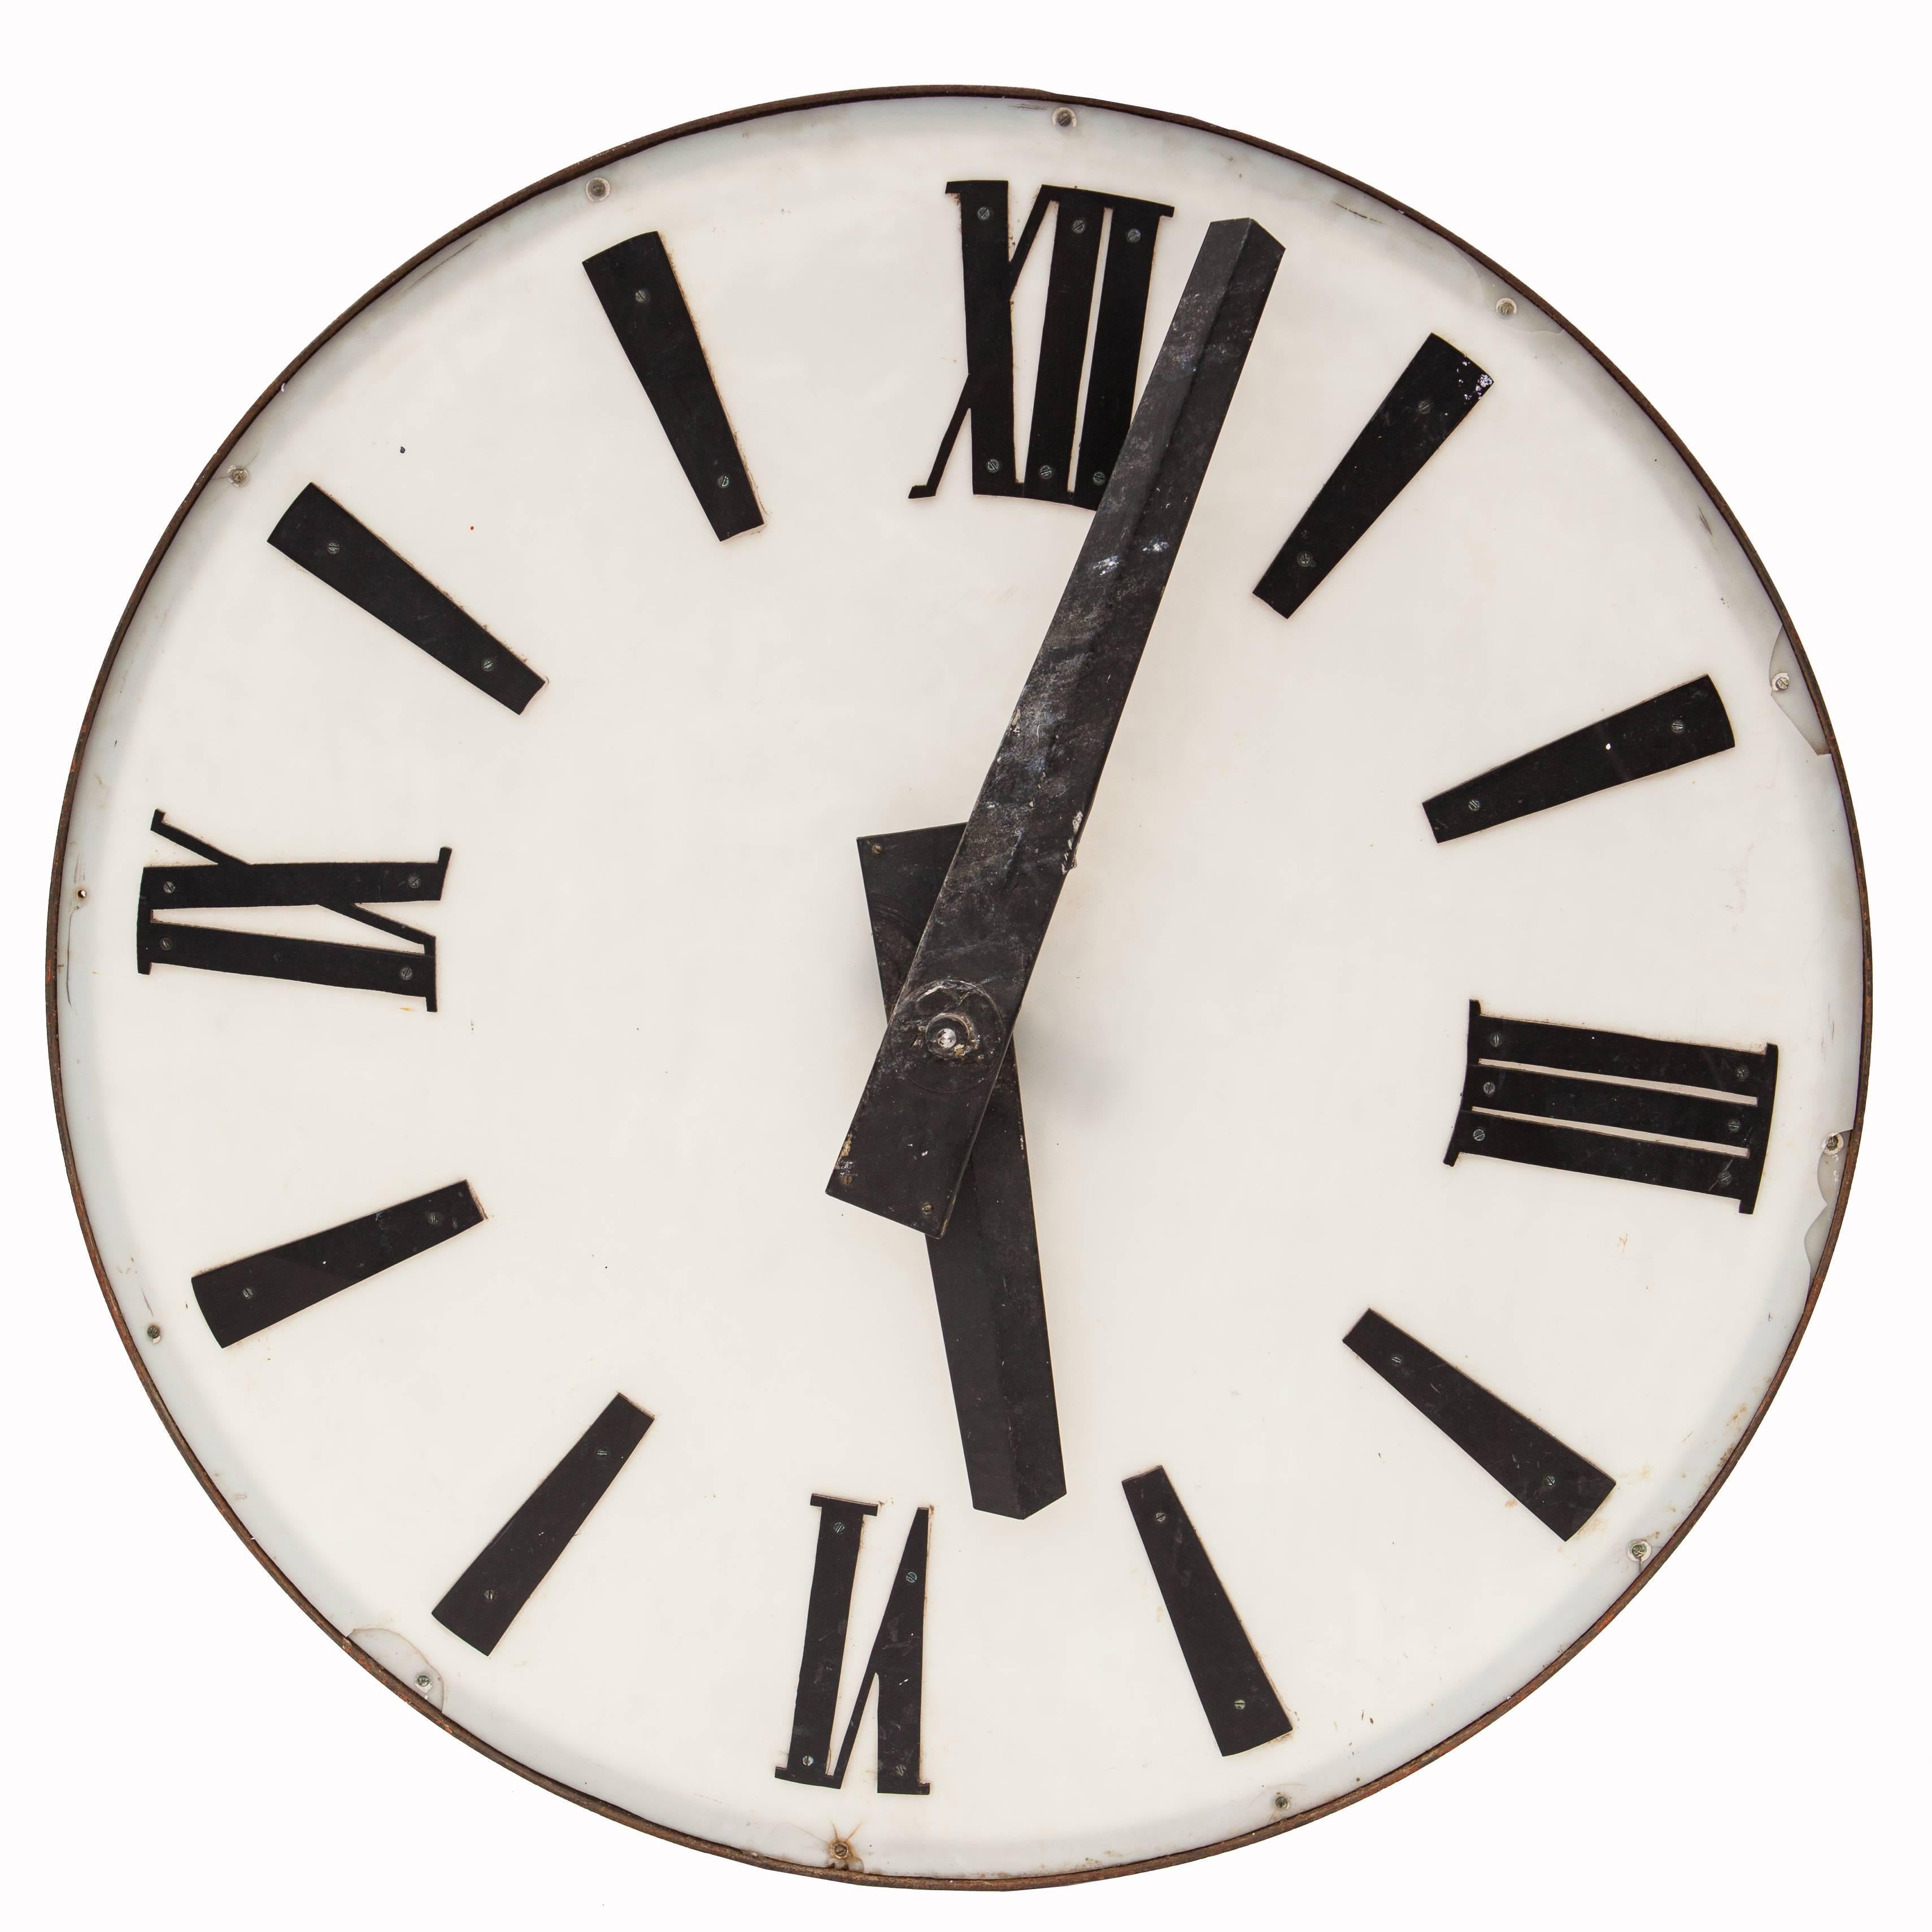 A French Large Size Clock Face From the Auvergne Region, Mid 20th Century